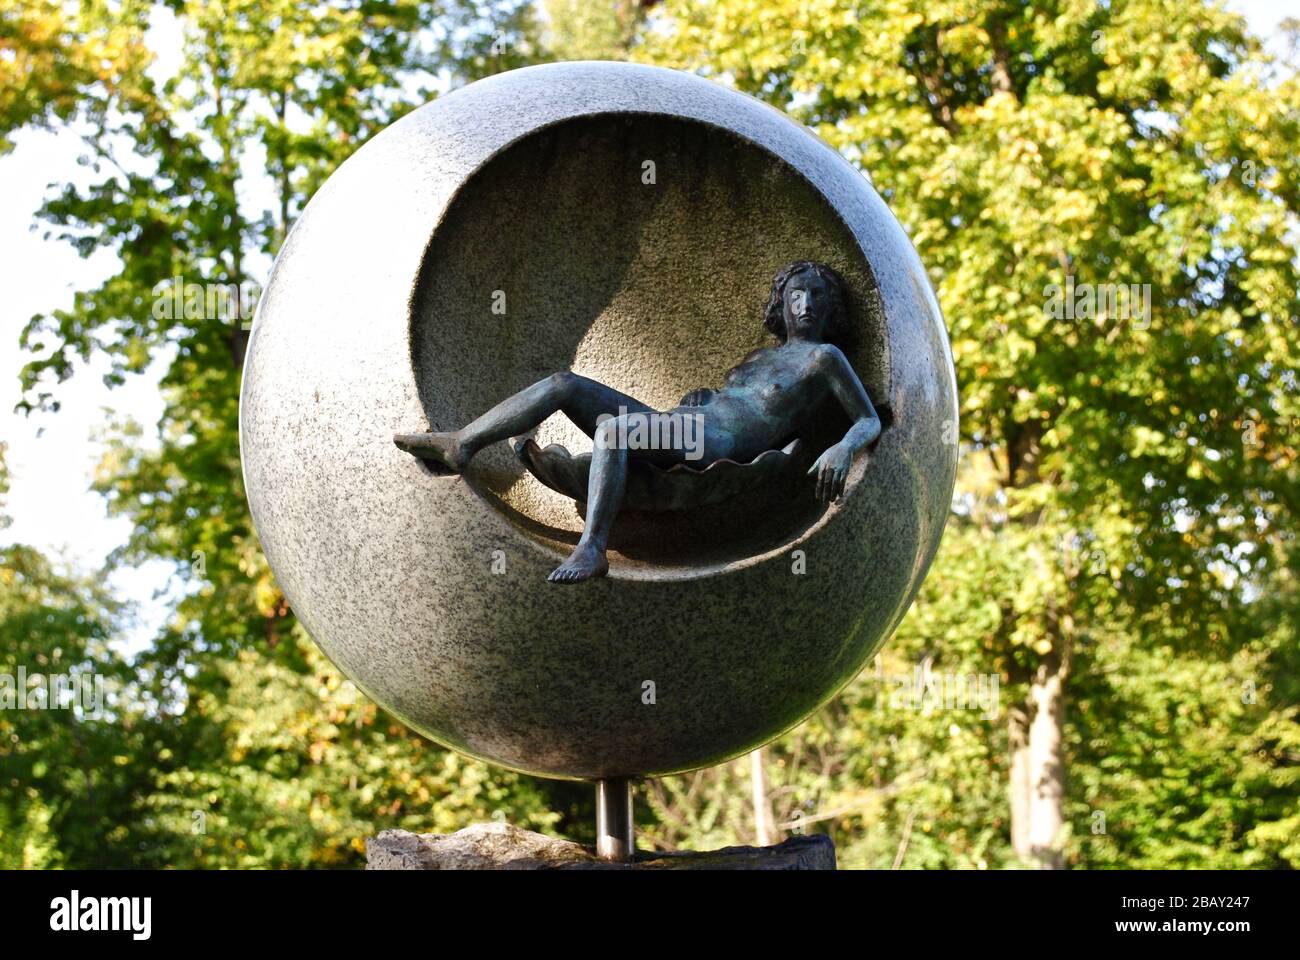 Bad Nauheim, Germany: Venus, goddess of love and beauty, at Goldsteinpark. Planet Trail (PlanetenWanderweg) with sculptures depicting each planet. Stock Photo